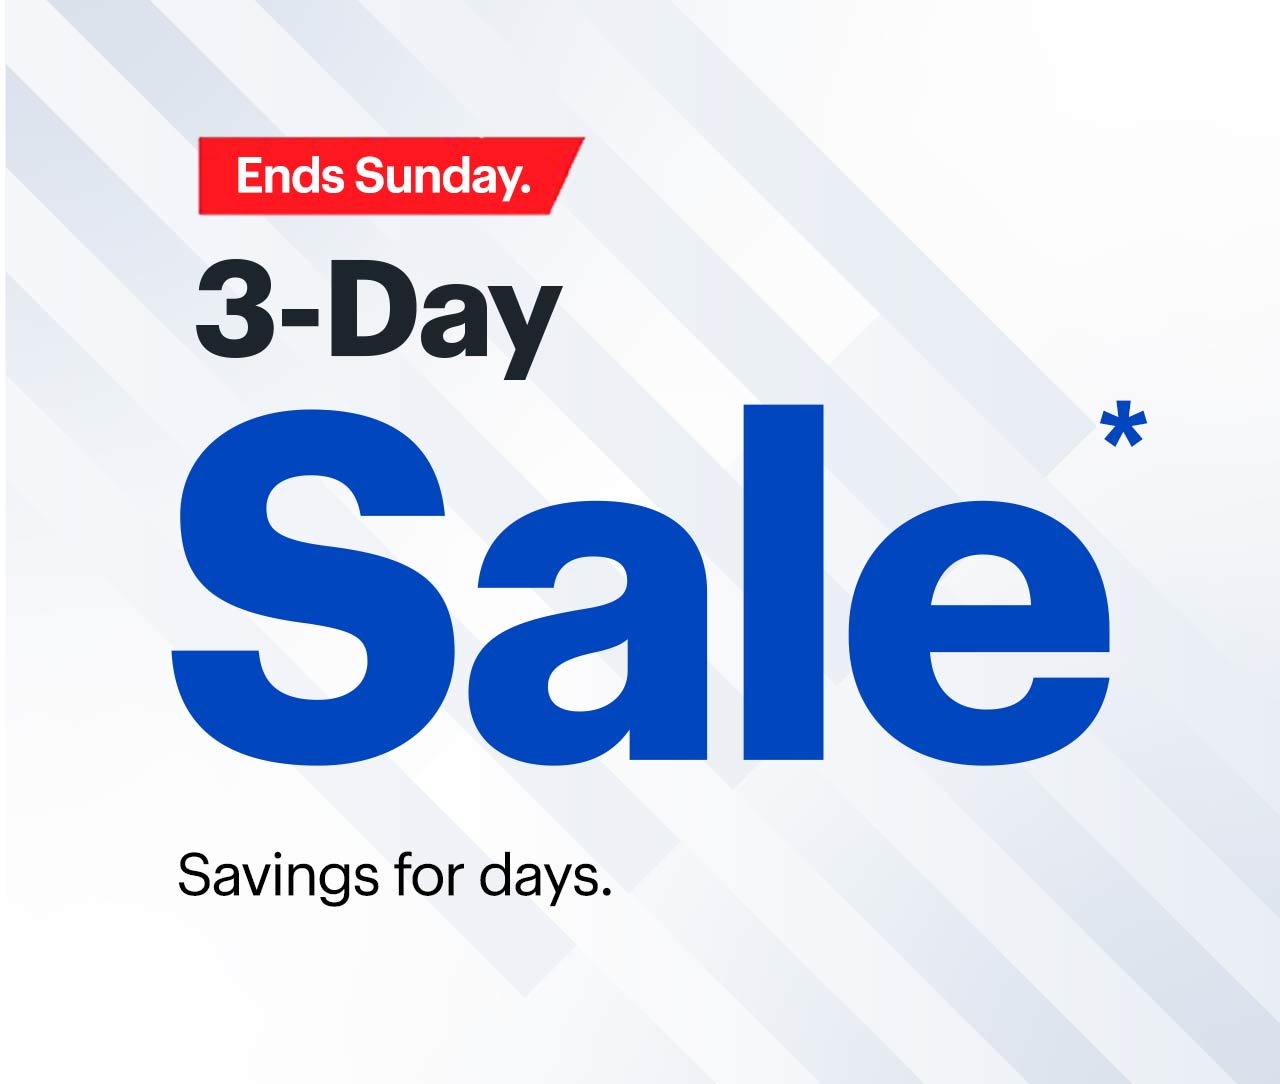 3-Day Sale. Savings for days. Ends Sunday. Reference disclaimer.